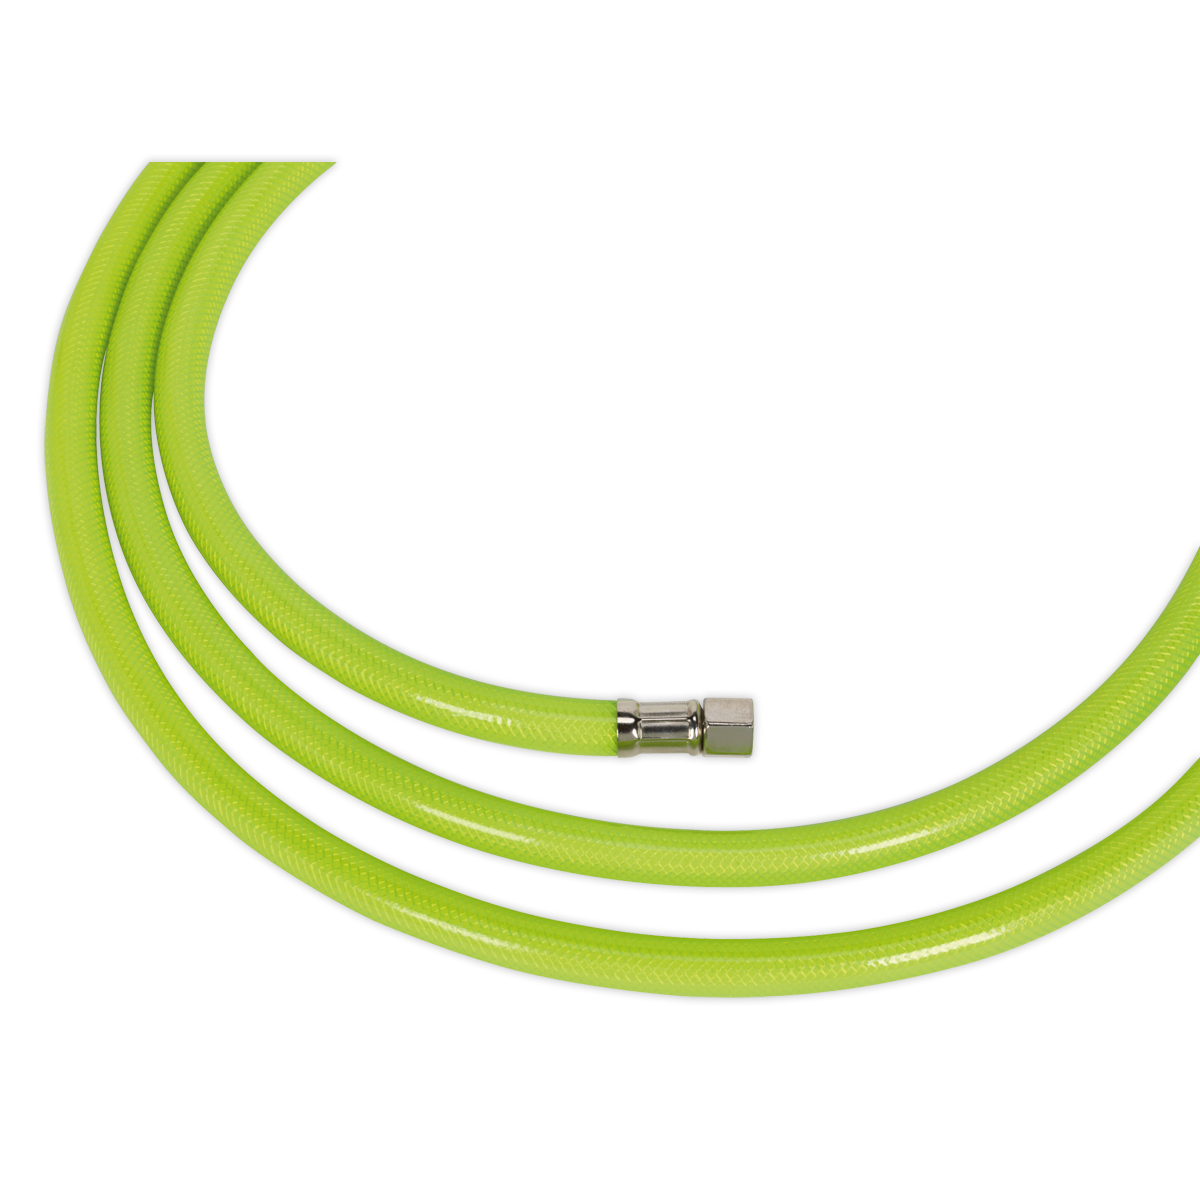 Sealey 10m x Ø8mm High-Visibility Air Hose with 1/4"BSP Unions AHFC10